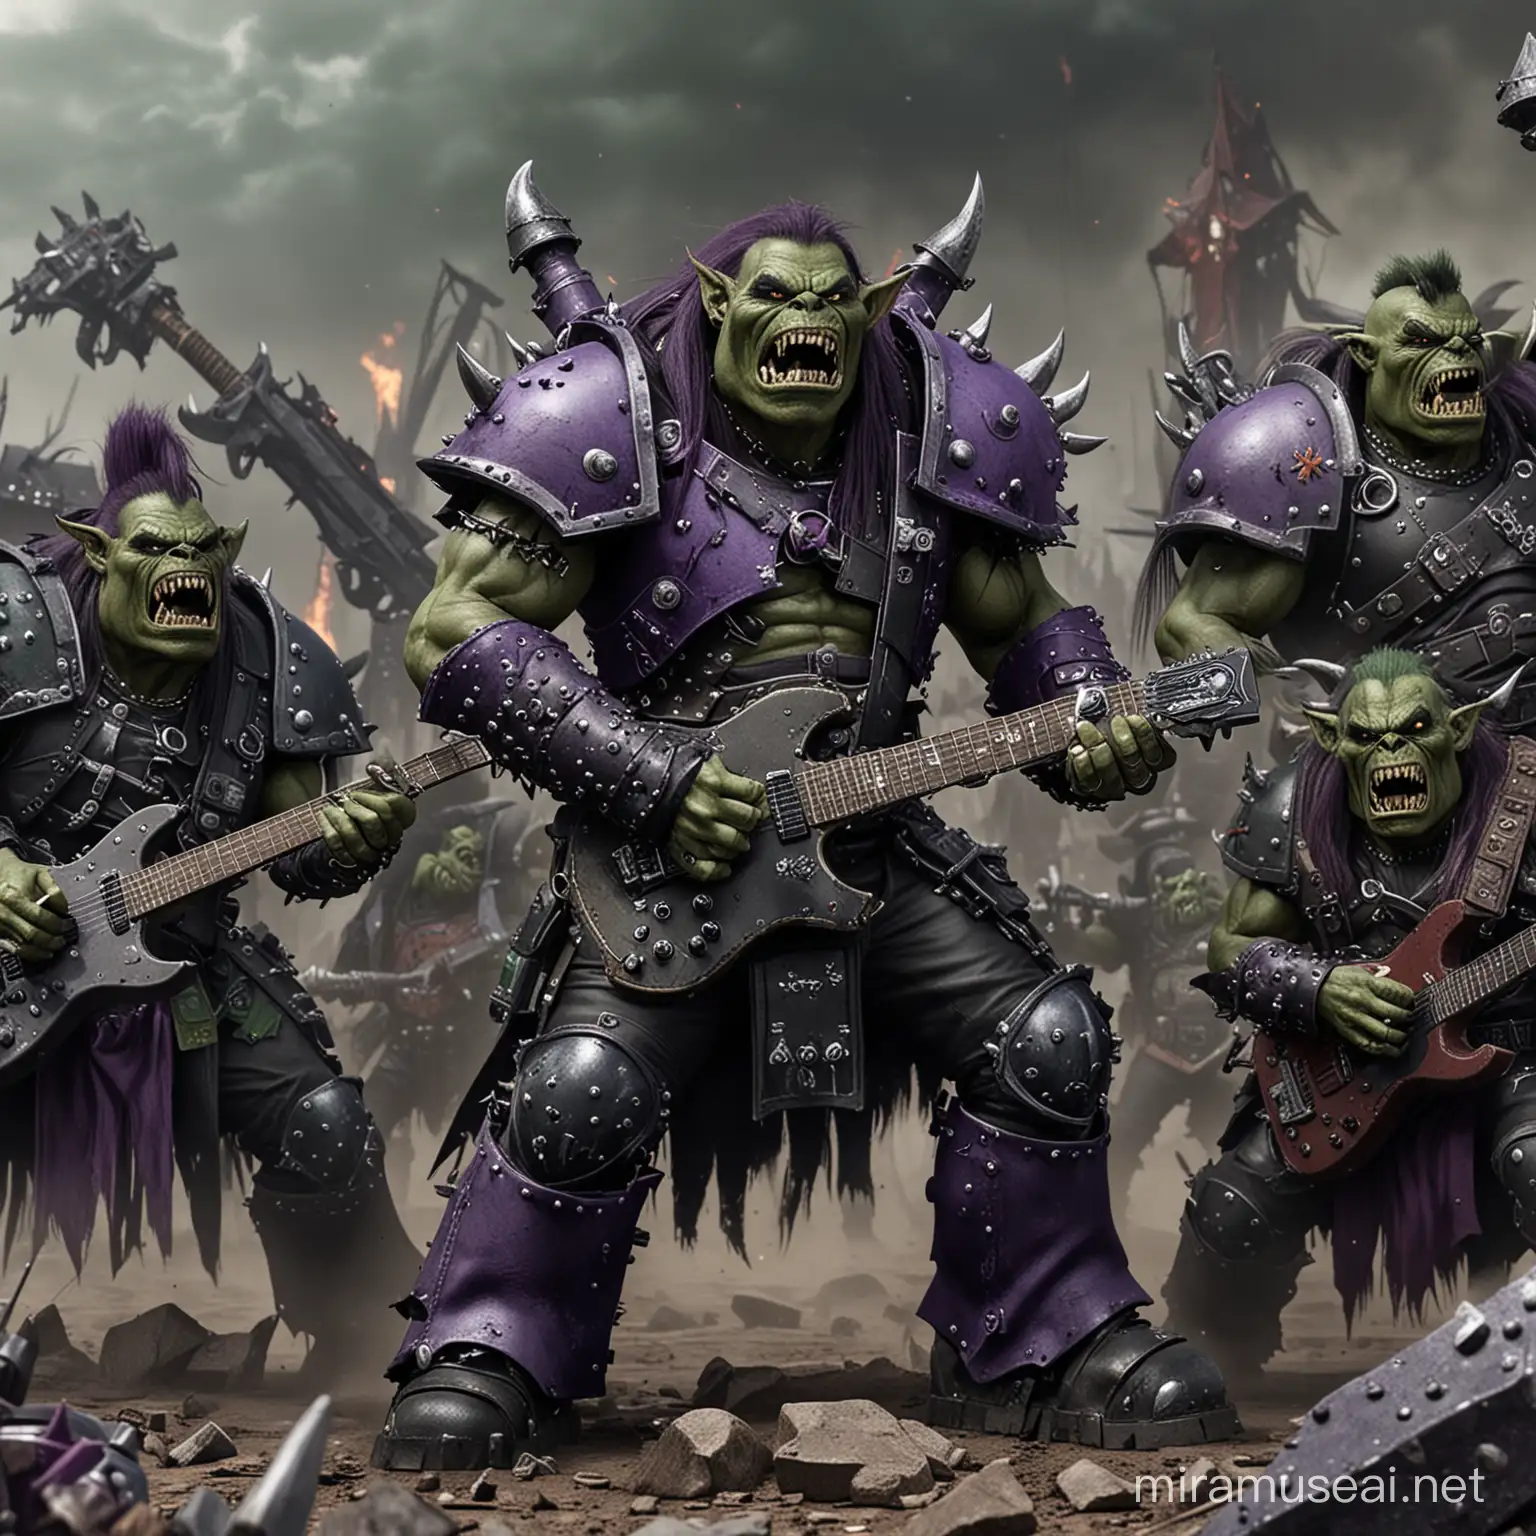 a warhammer 40k ork heavy metal band rocking out during a battle. purple and black leather armour with green skin. lots of orks